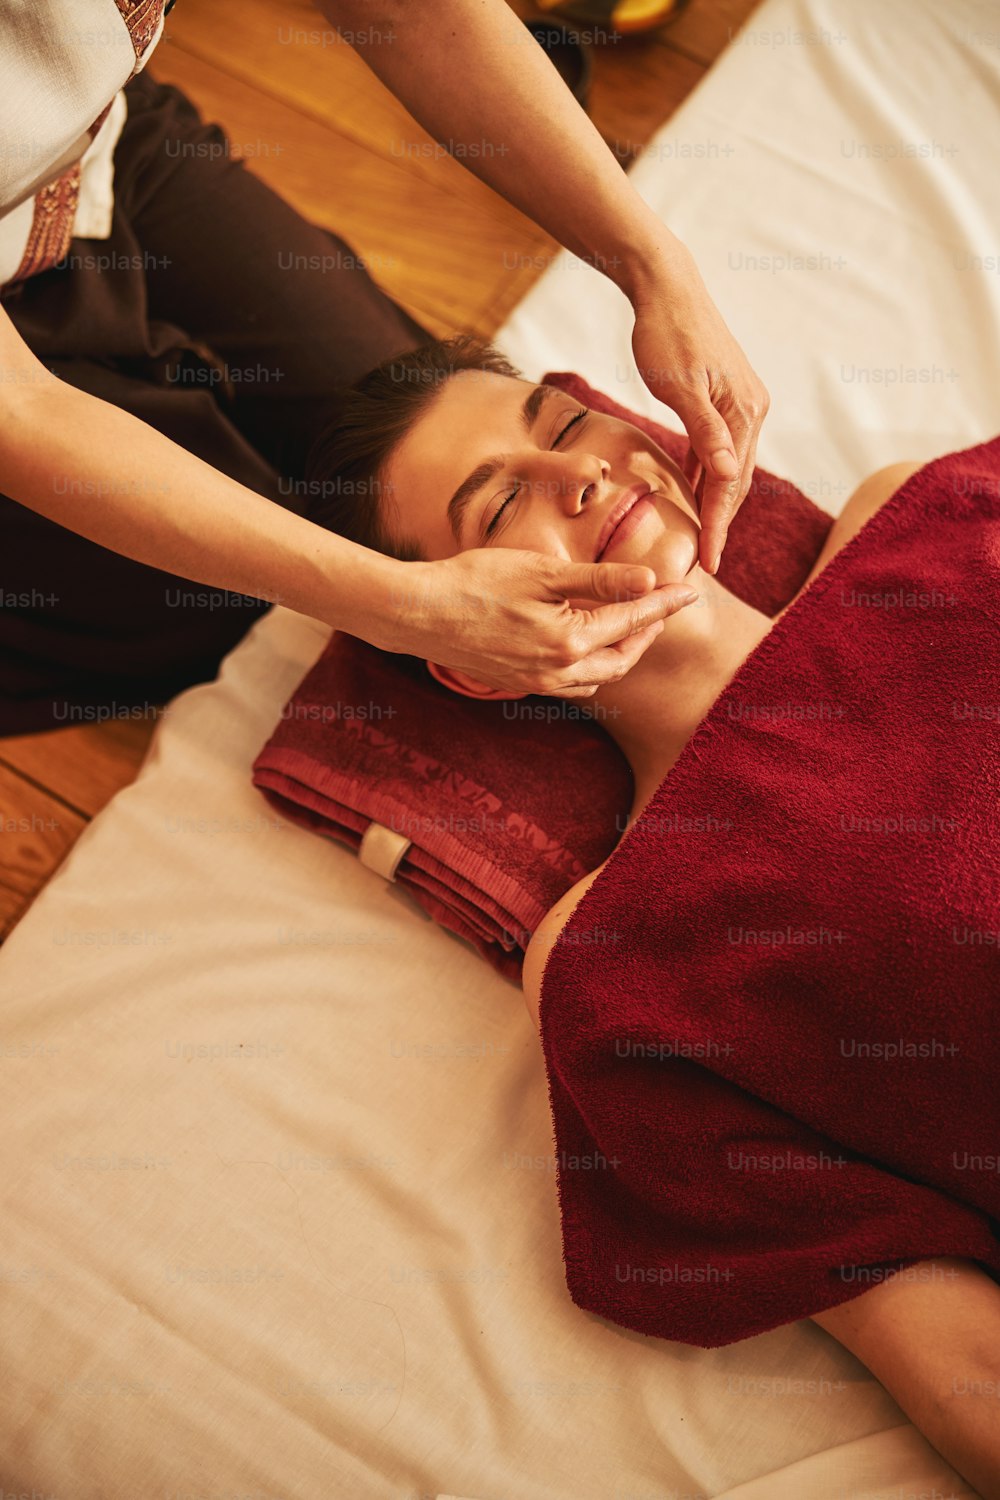 Female with body covered in red blanket enjoying hand movements of massage therapist on sides of her chin